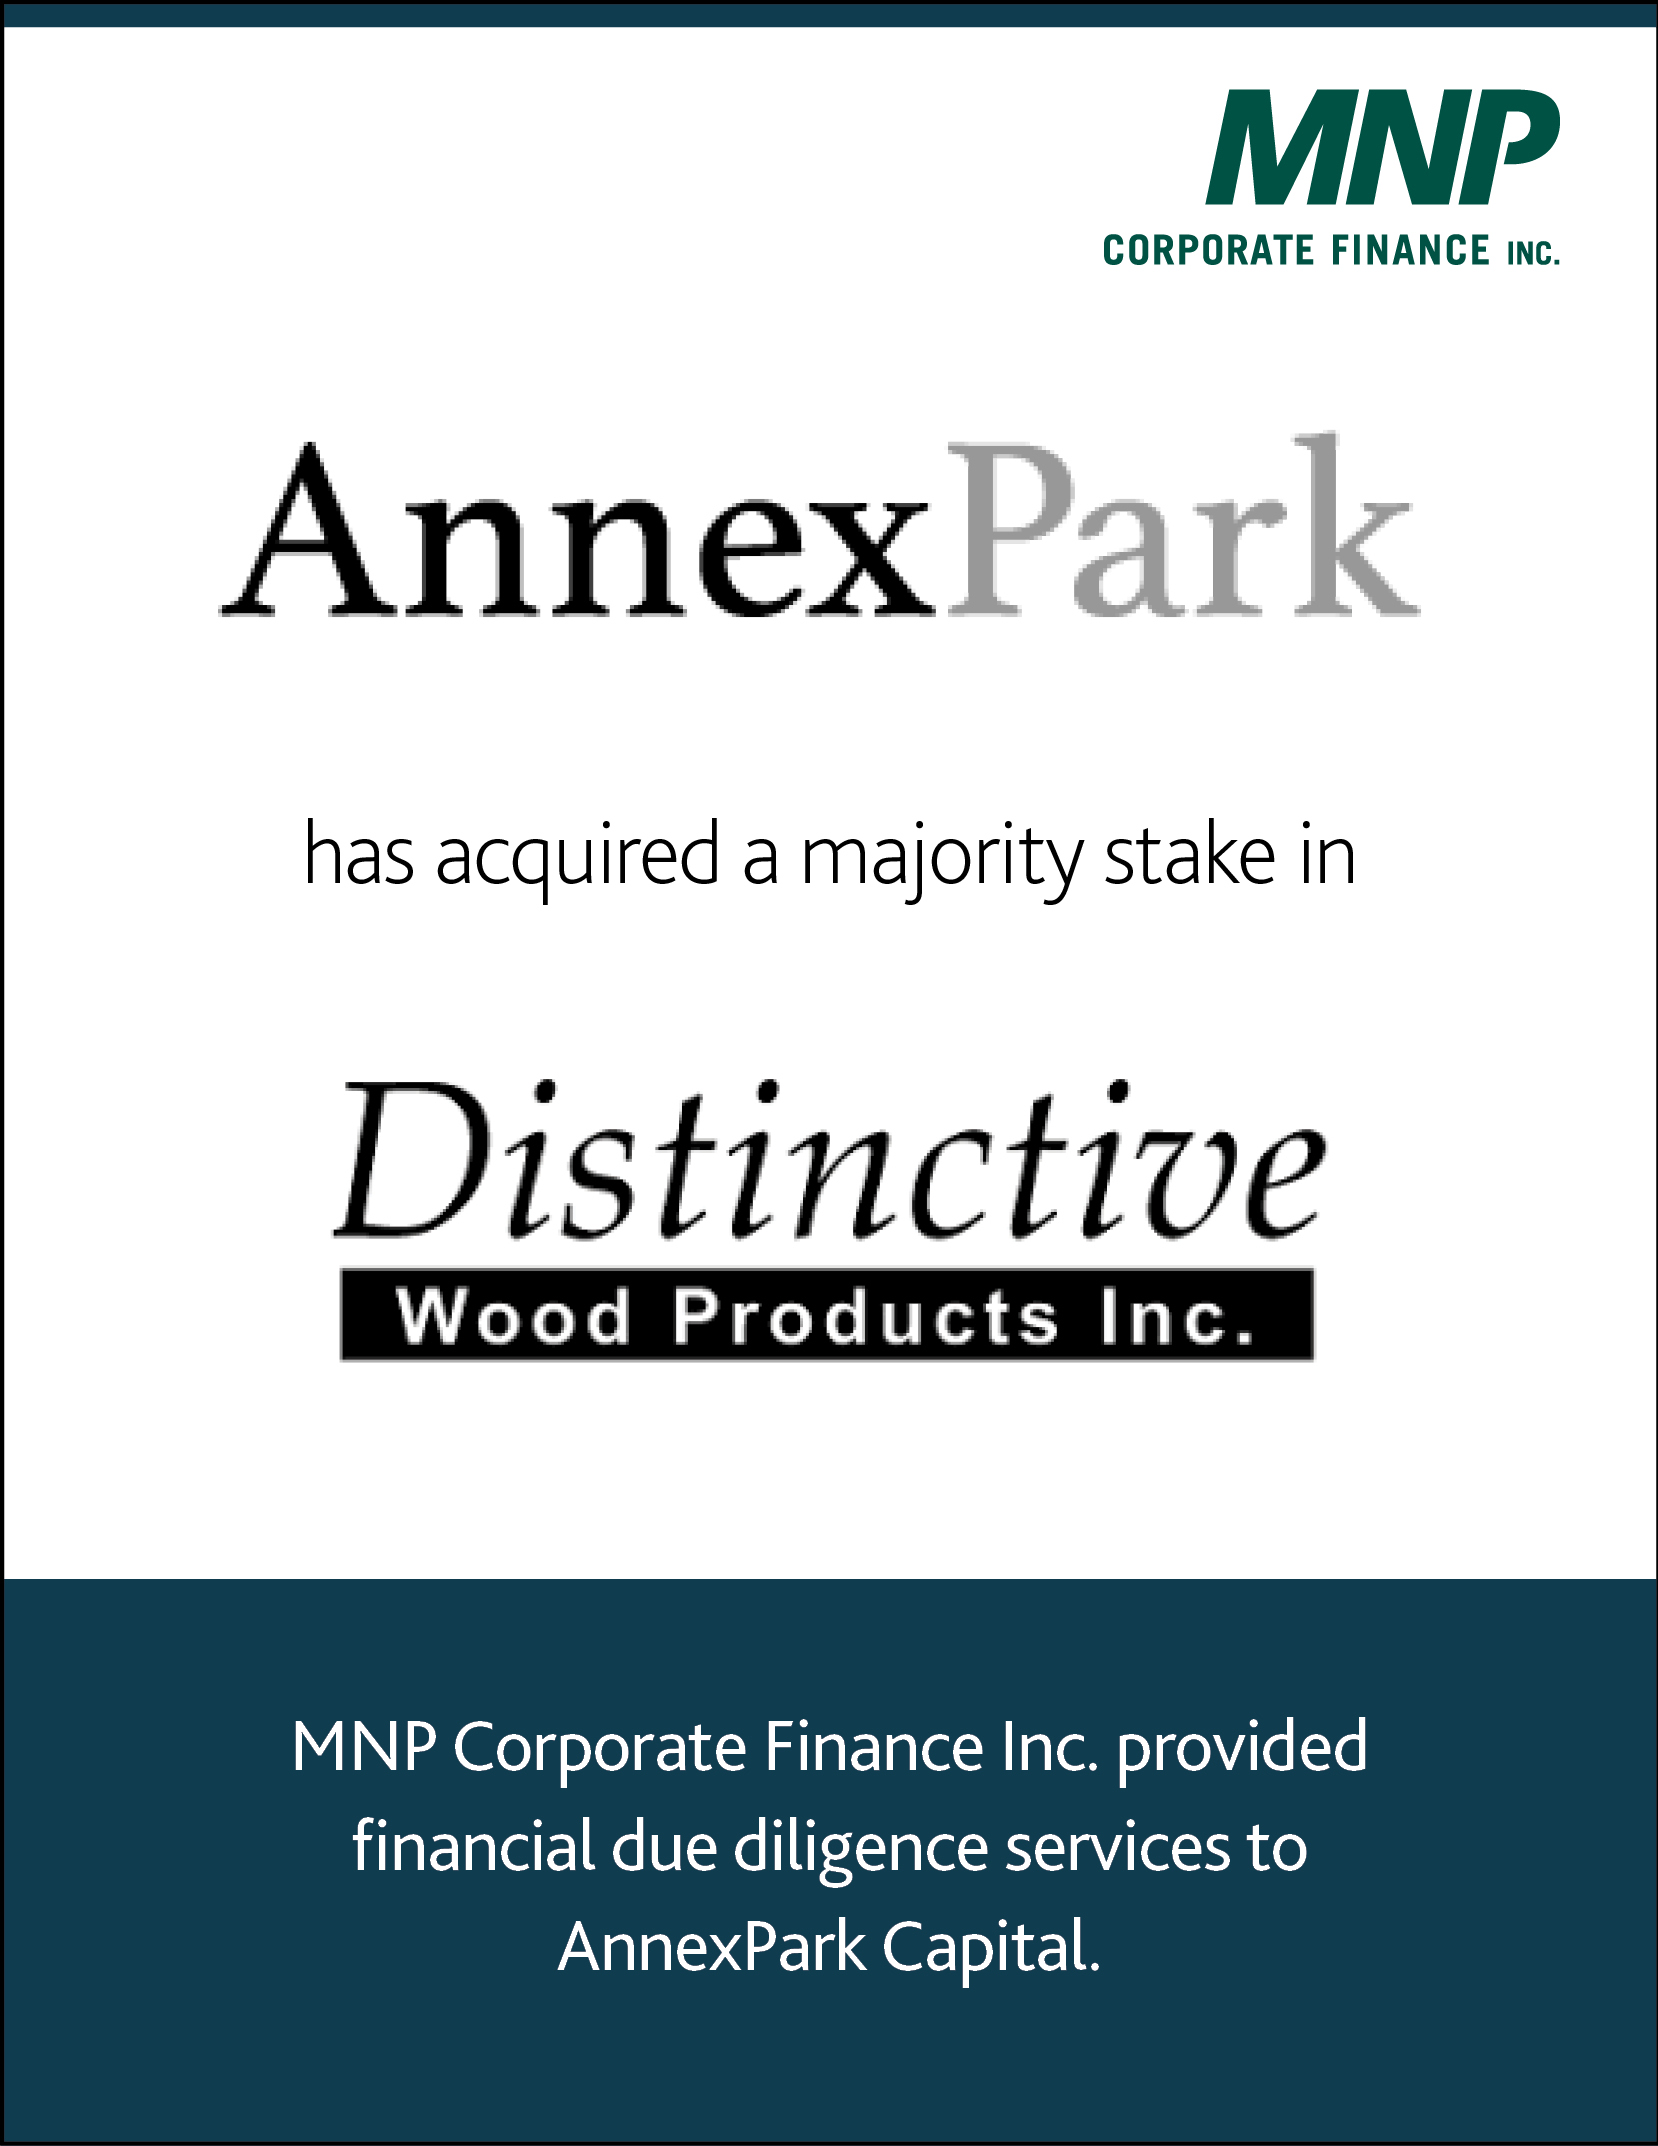 Annex Park Capital has provided equity capital to Distinctive Wood Products Inc.